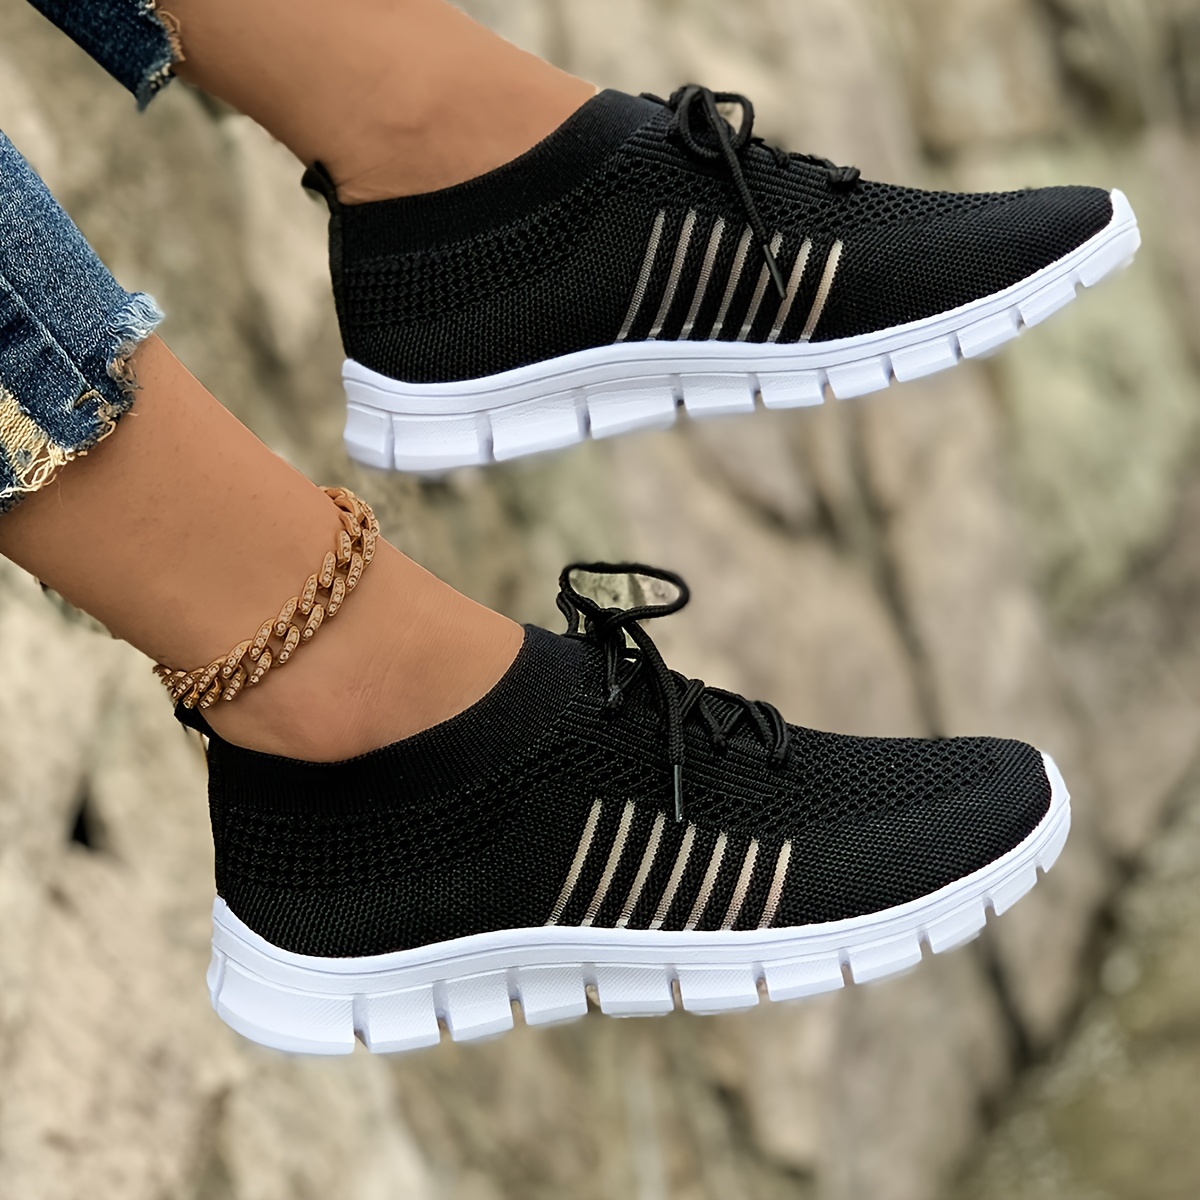 mesh sneakers women s knit lightweight breathable mesh lace details 8